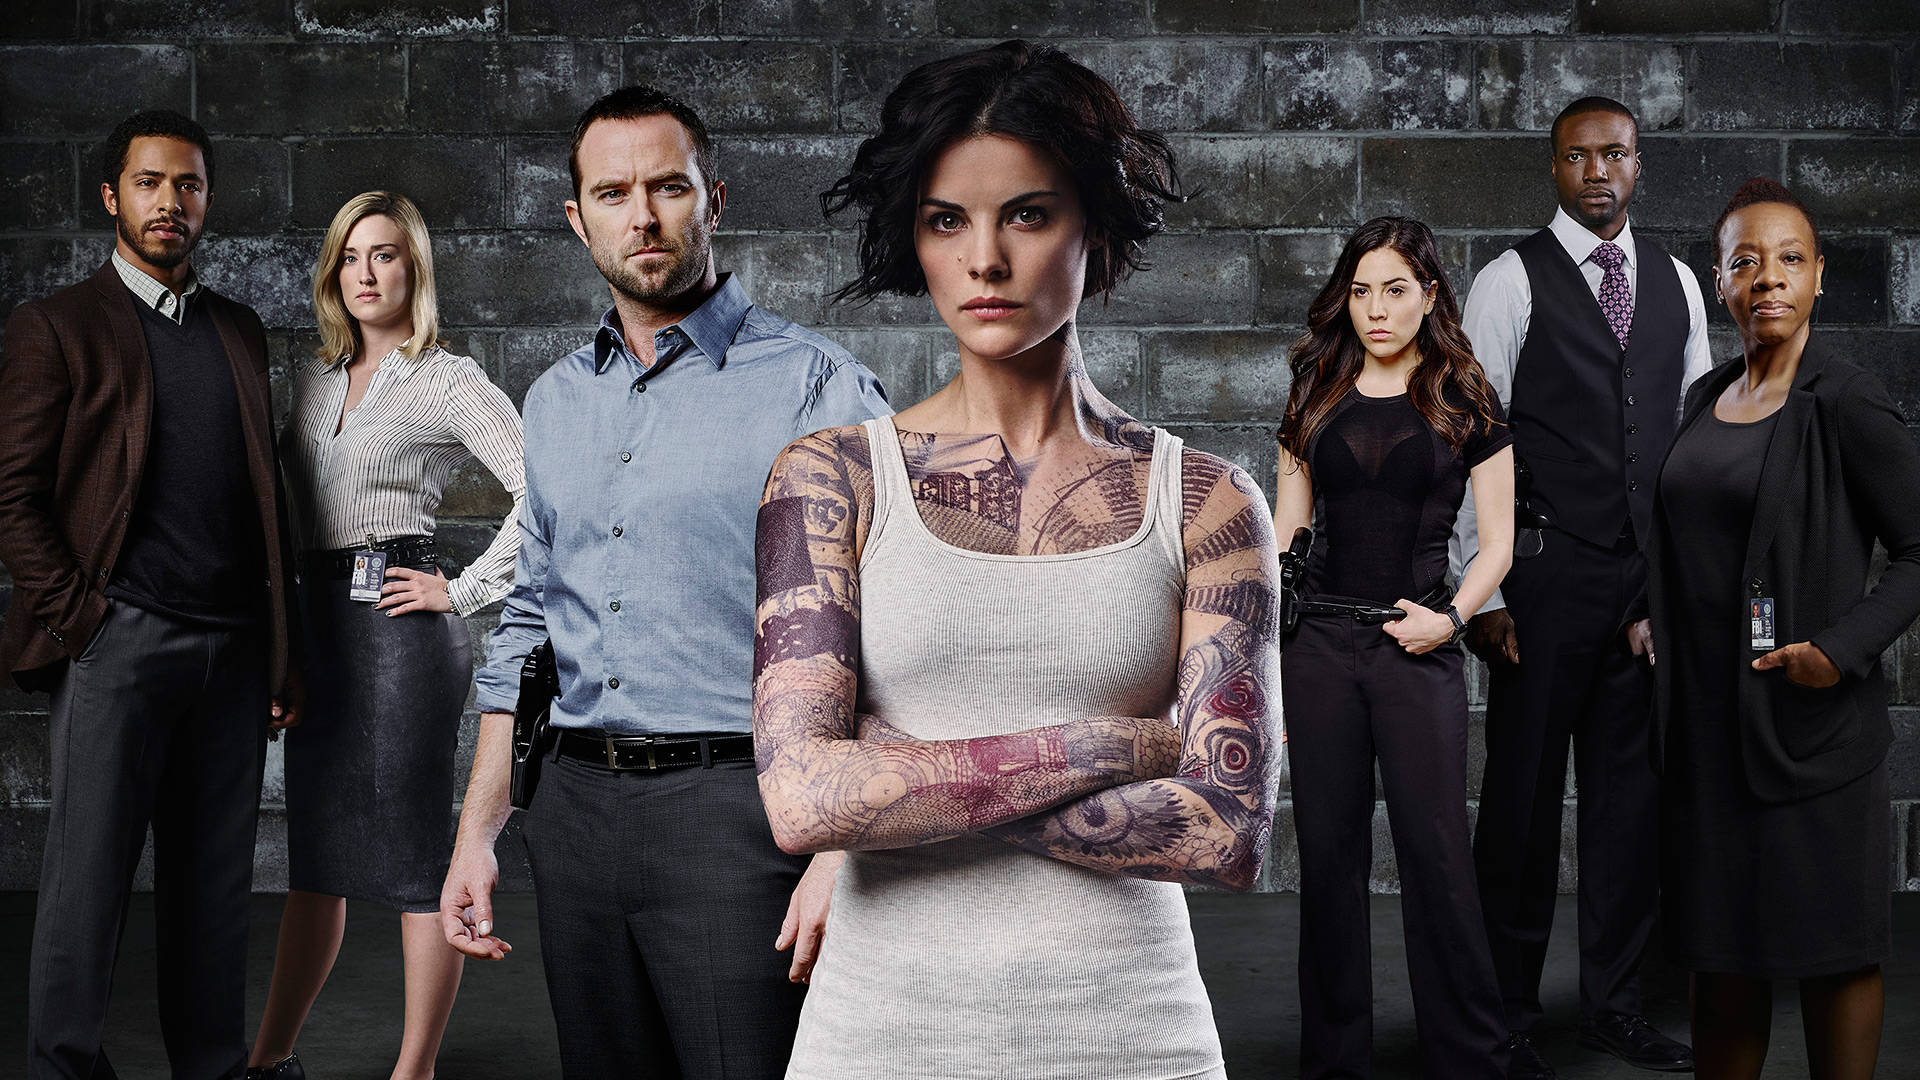 The main cast of the hit series Blindspot seen in a dramatic pose. Wallpaper